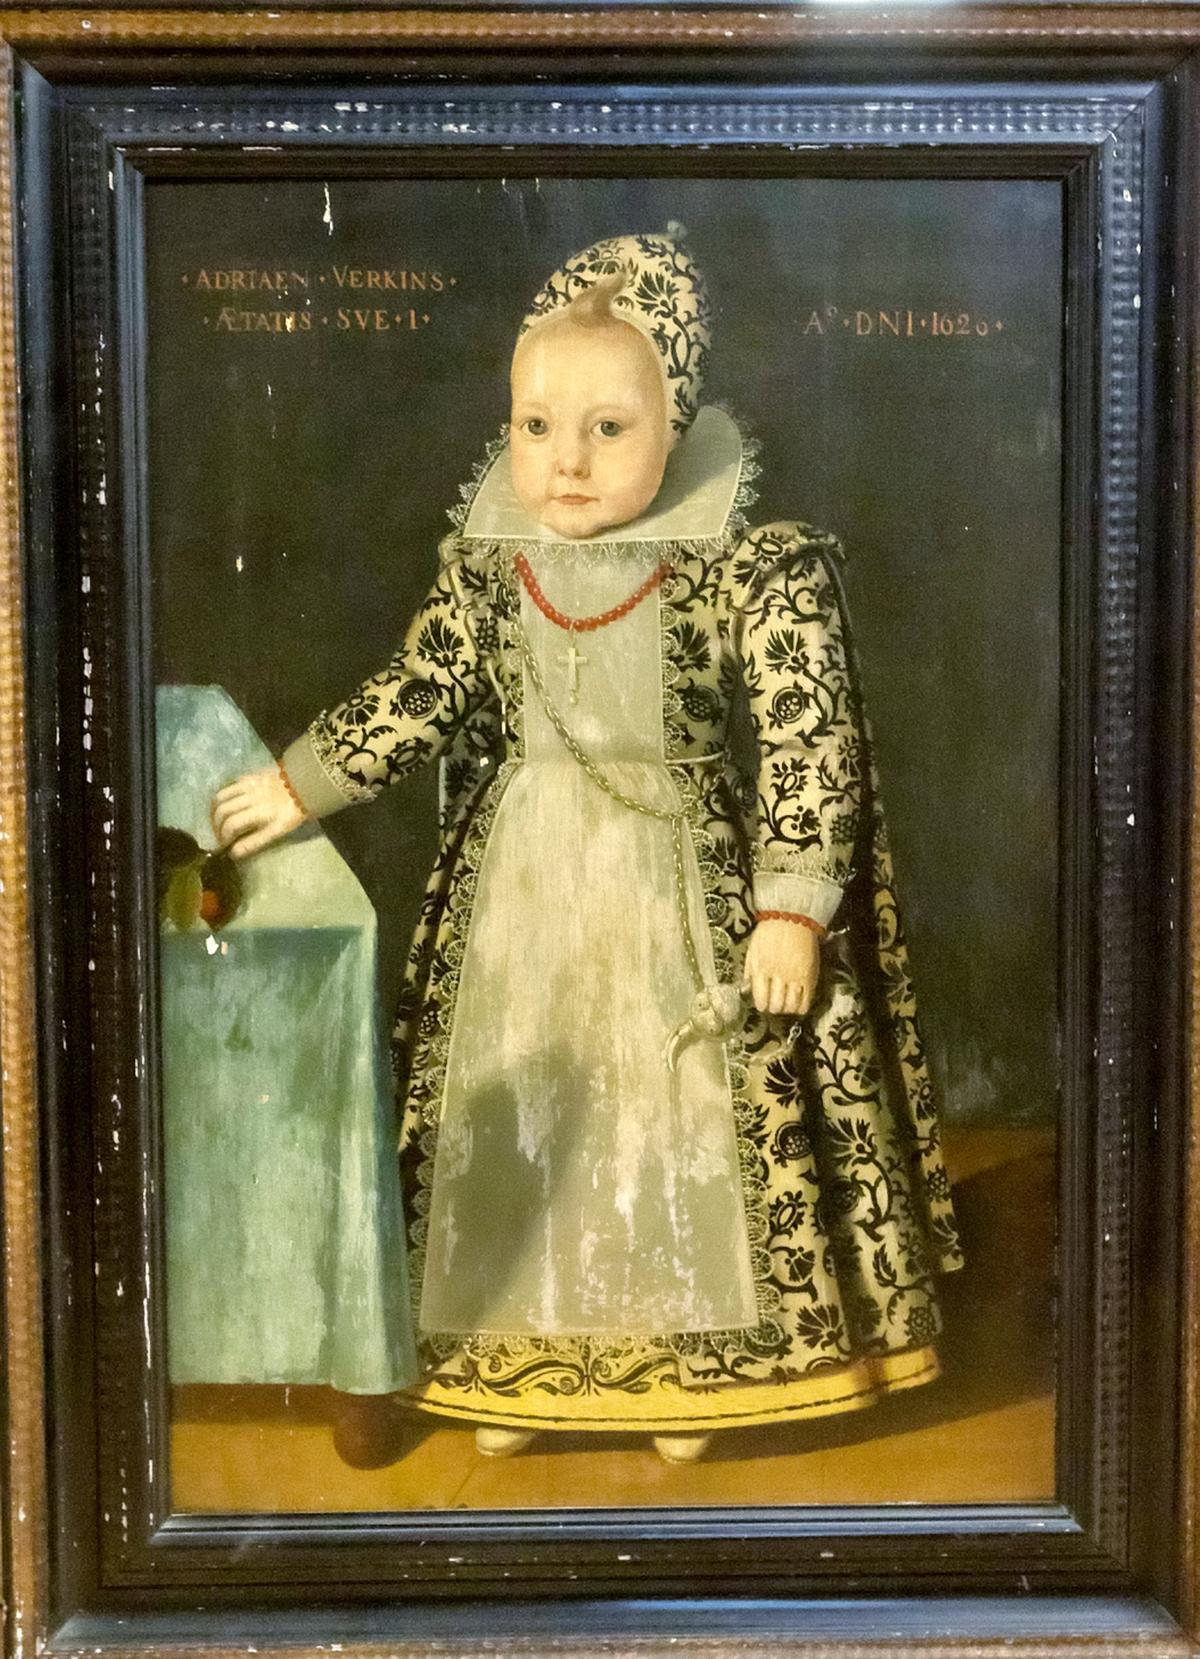 A forgotten portrait from 1626 of a "miniature adult" was spotted hanging behind a door. (SWNS)